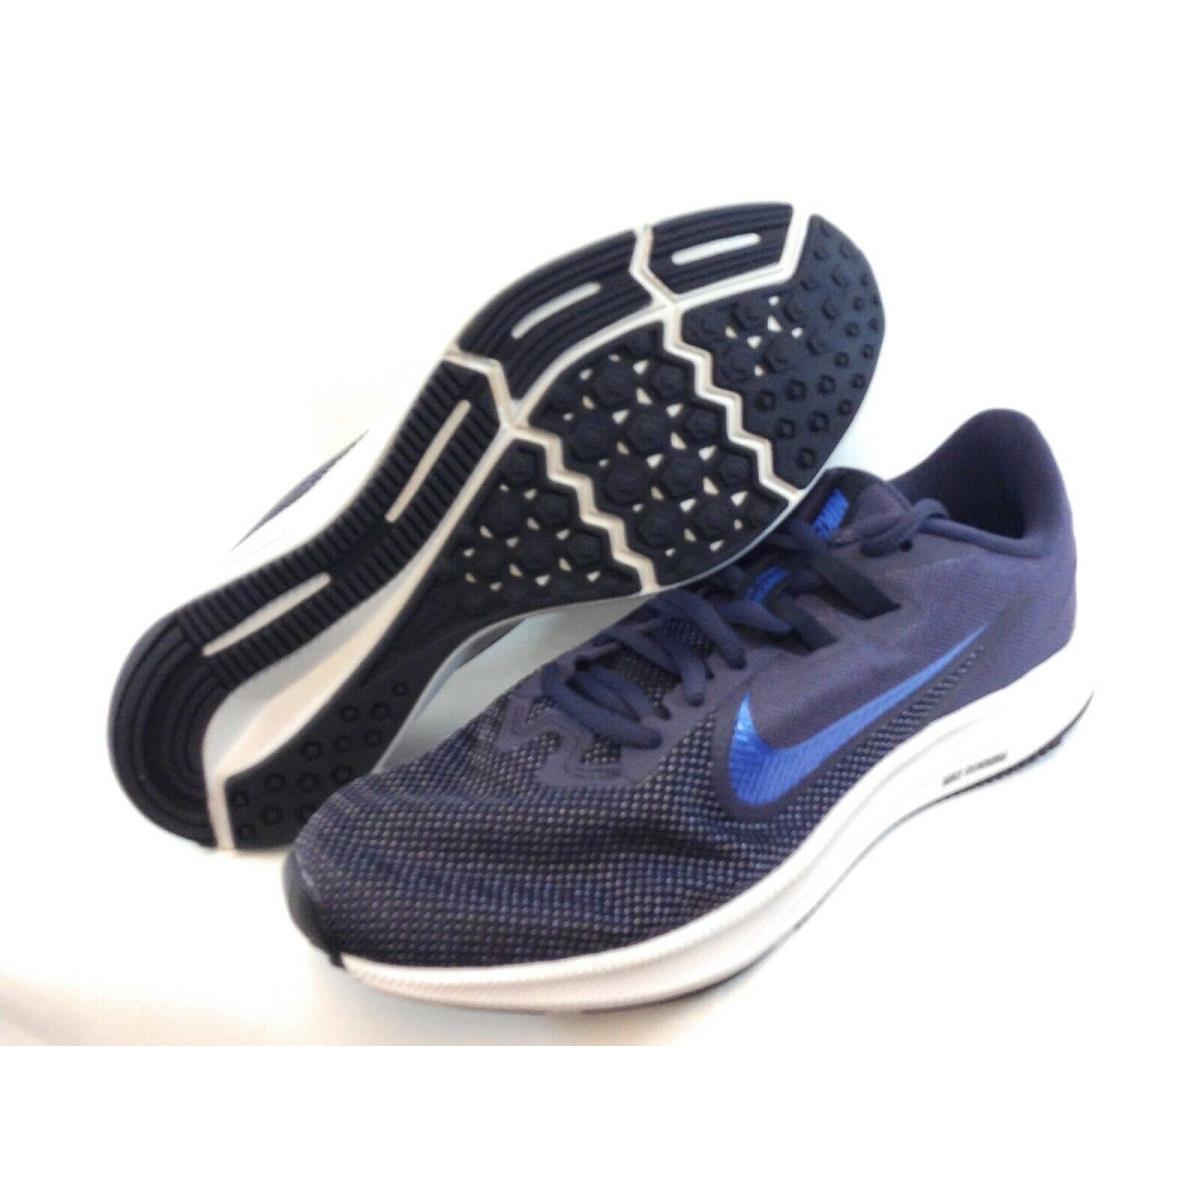 Mens Nike Downshifter 9 AQ7481 011 Navy Blue White Sneakers Shoes - Blue , Gridiron Blue Manufacturer